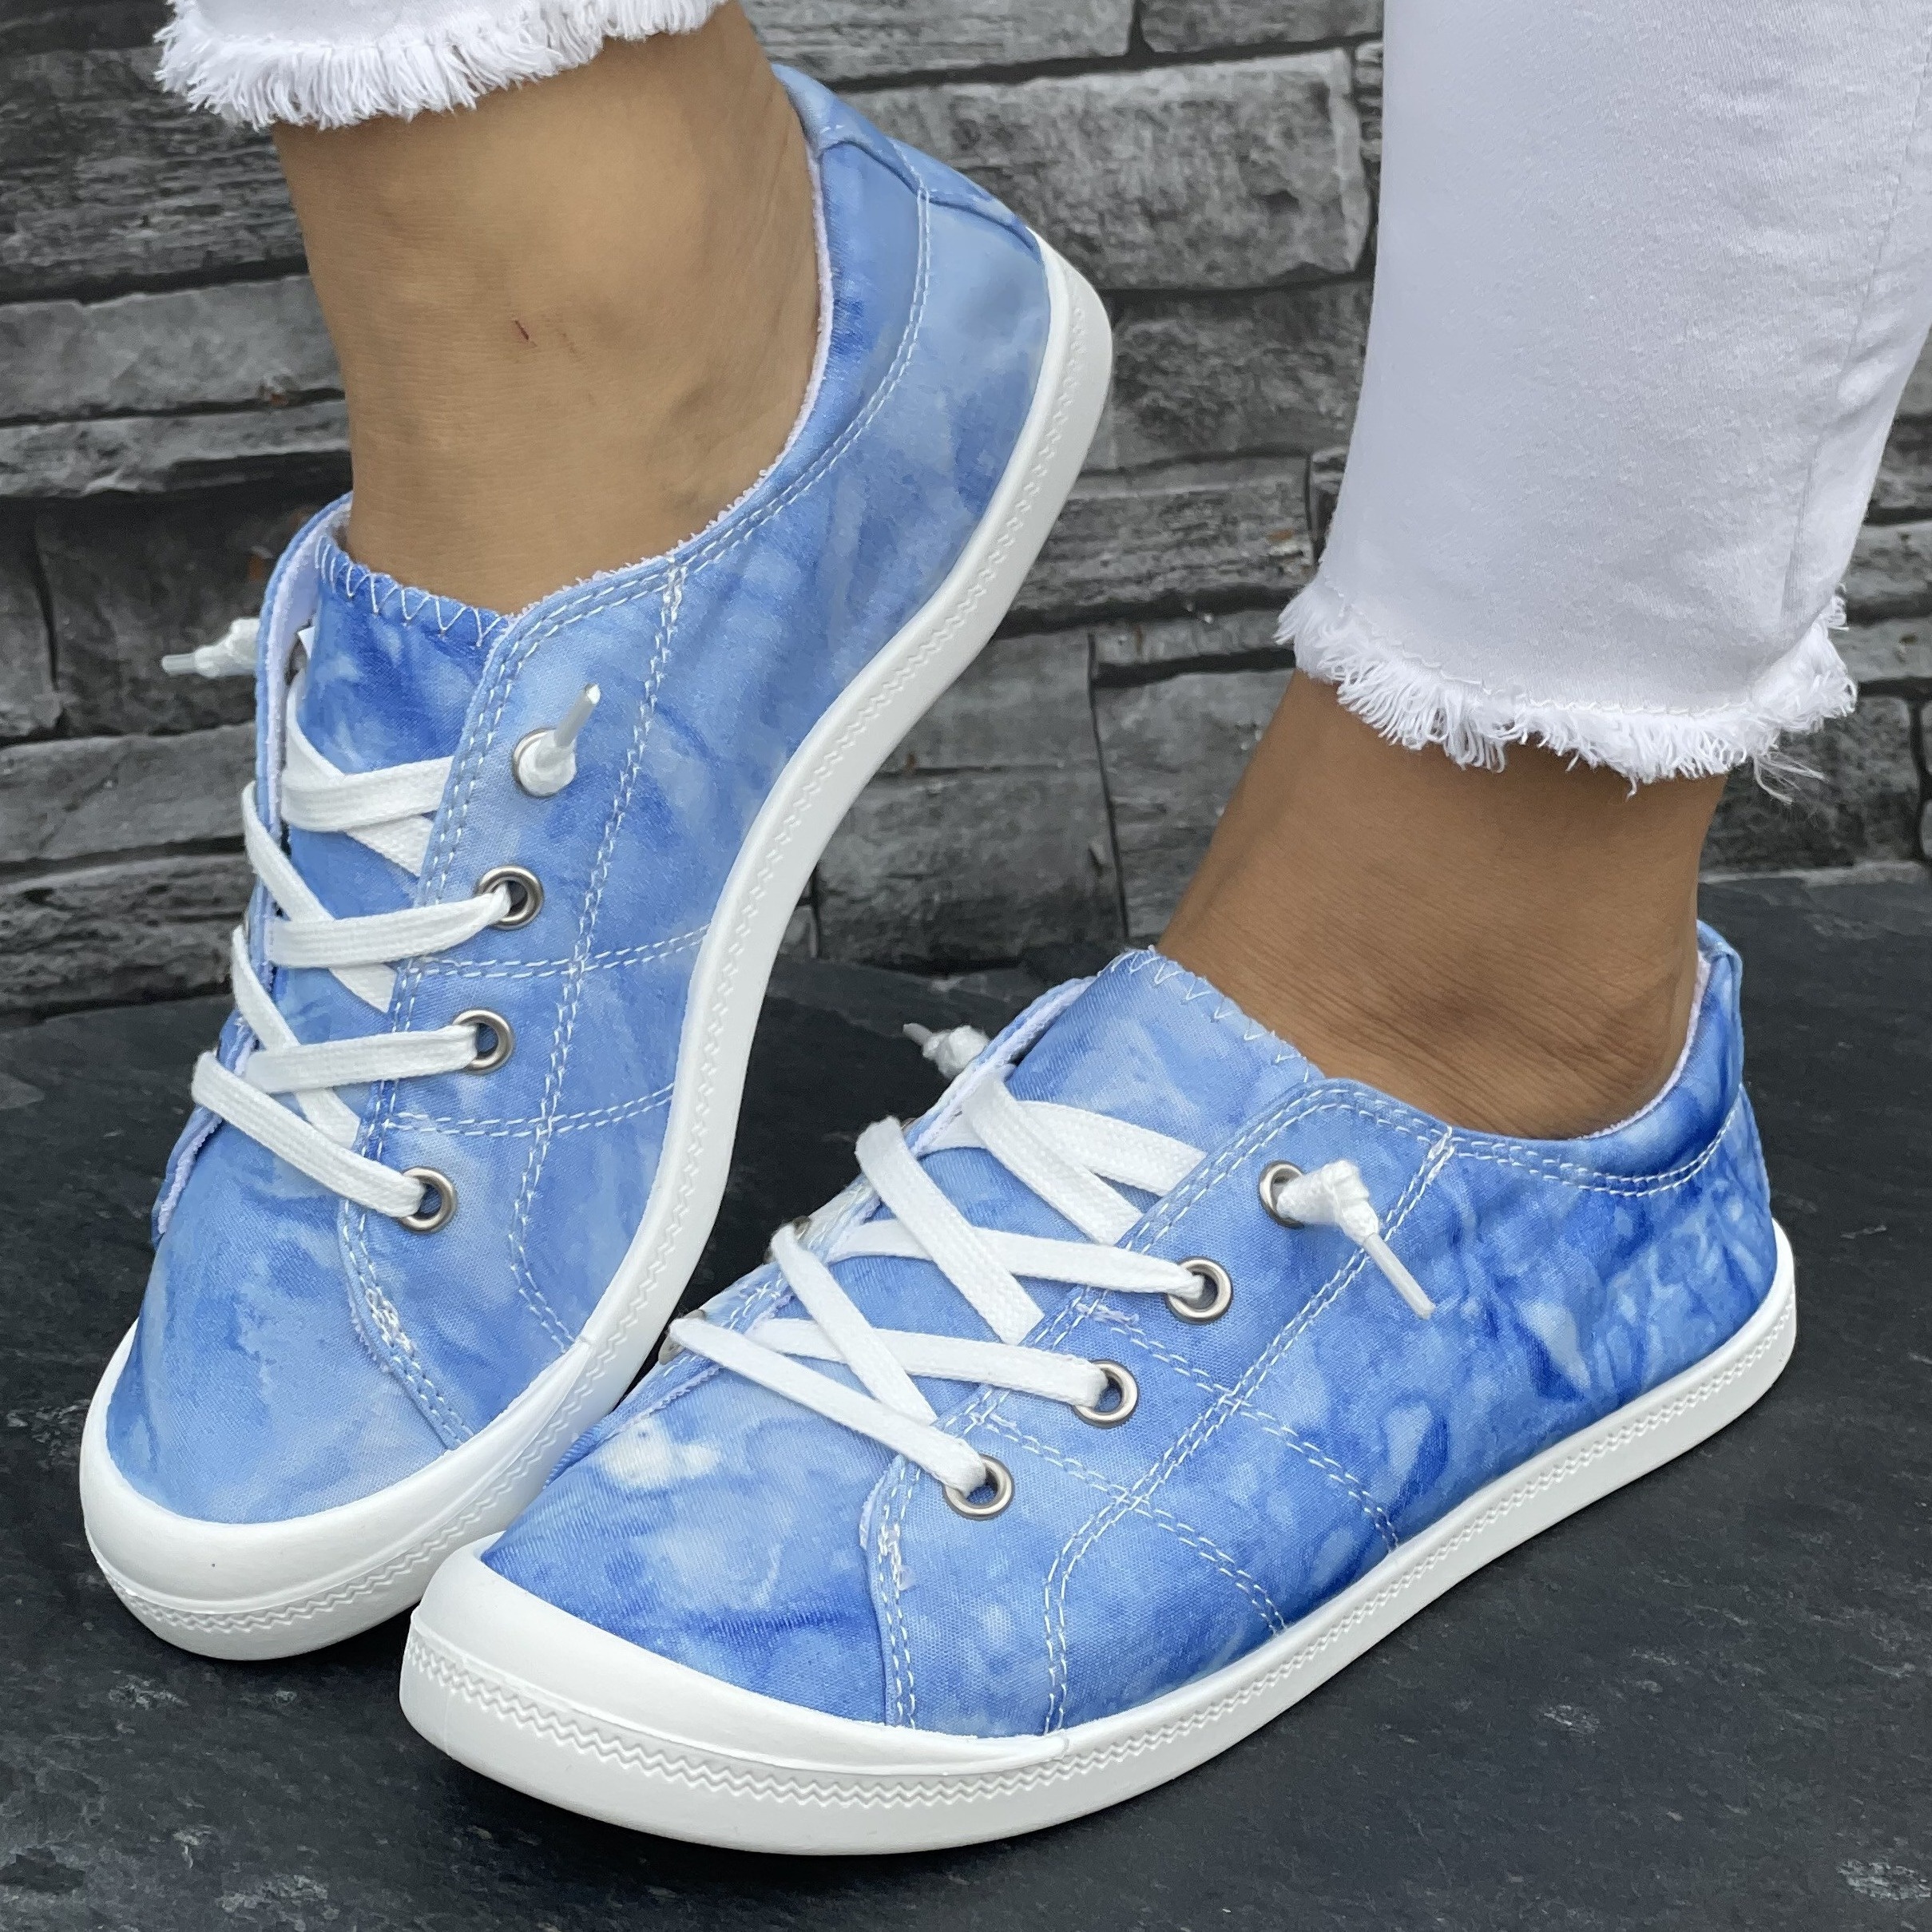 

Women's Sky Blue Tie-dye Print Sneakers, Fashionable All-match Flat Casual Shoes, Comfortable Lightweight For Summer/autumn